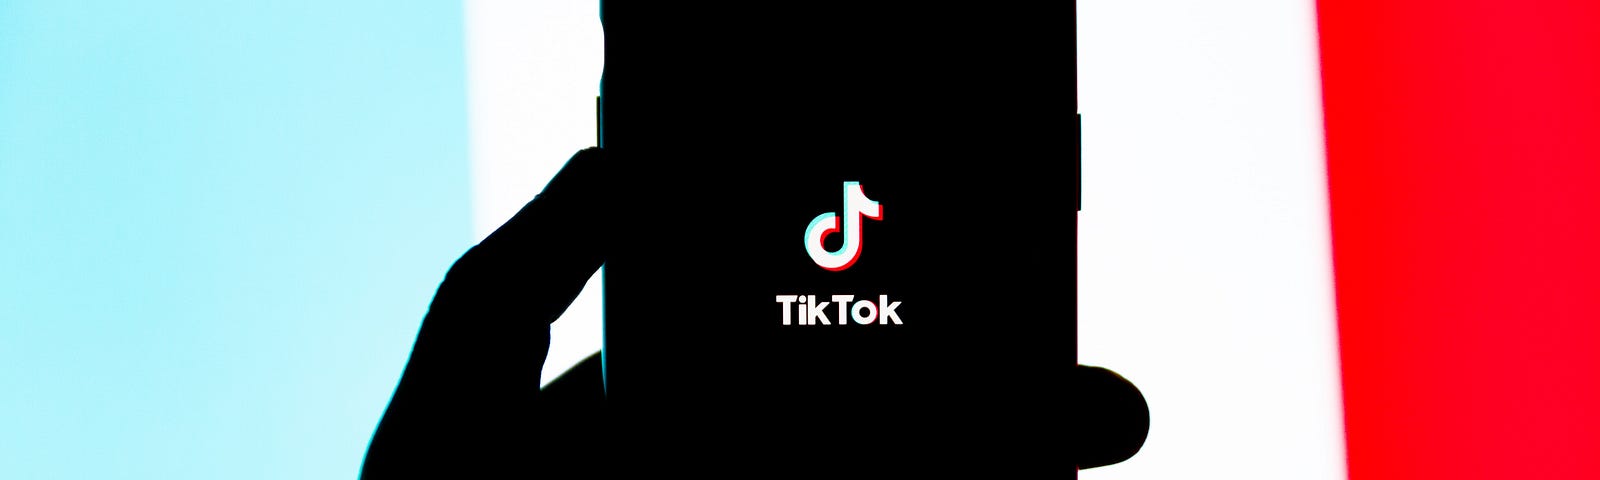 Photo of hand holding a cell phone with the TikTok logo.